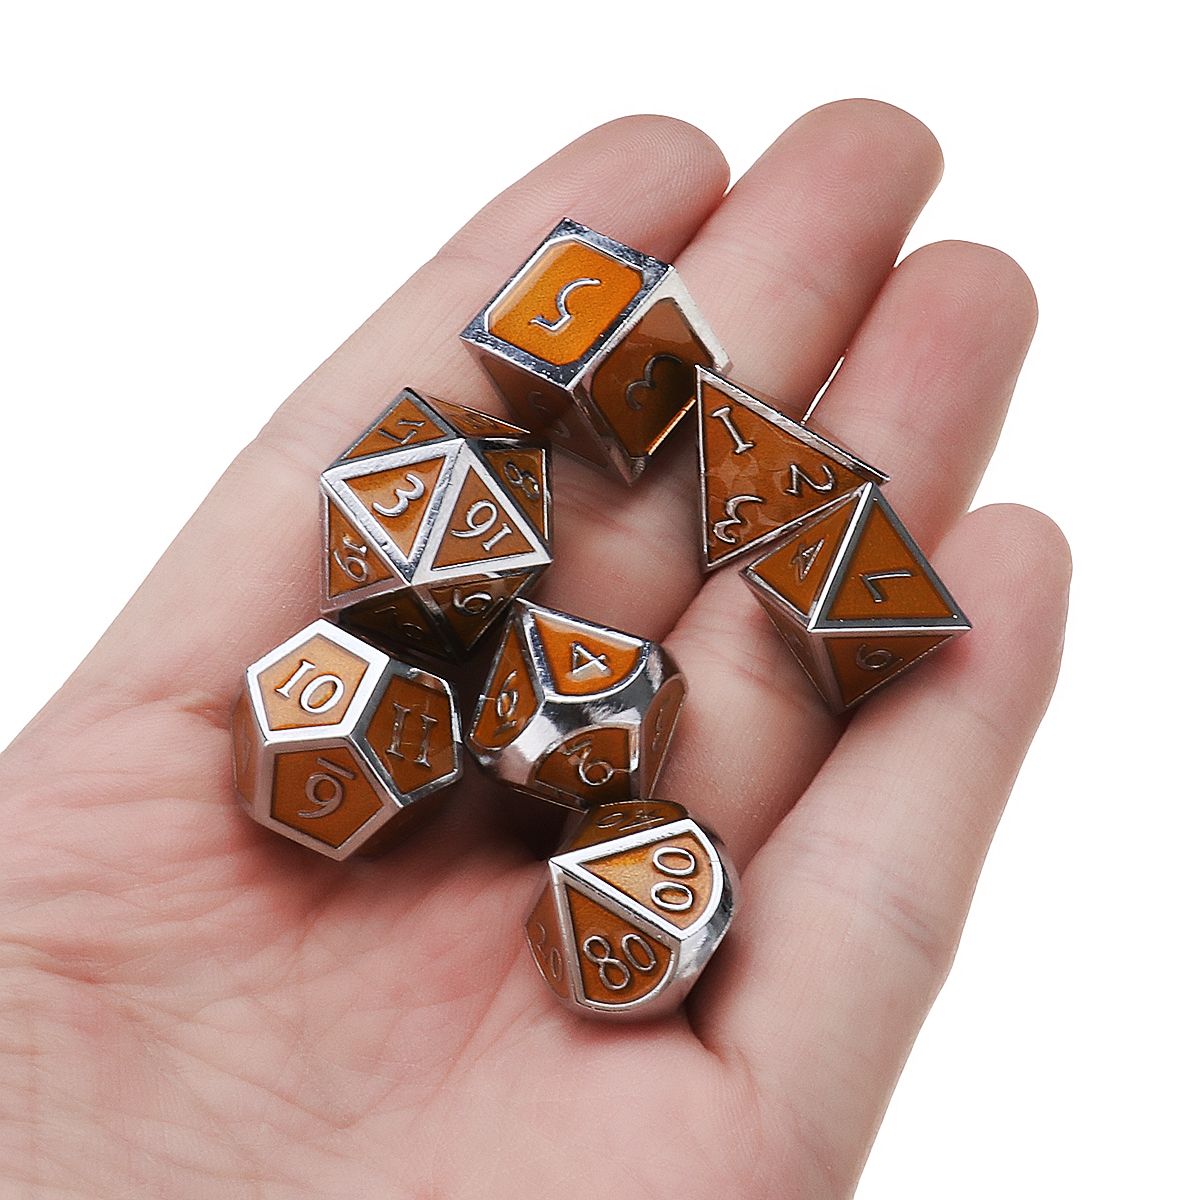 7Pcs-Antique-Metal-Polyhedral-Dices-With-Bag-Copper-Color-For-Dungeons-Dragons-Game-1446543